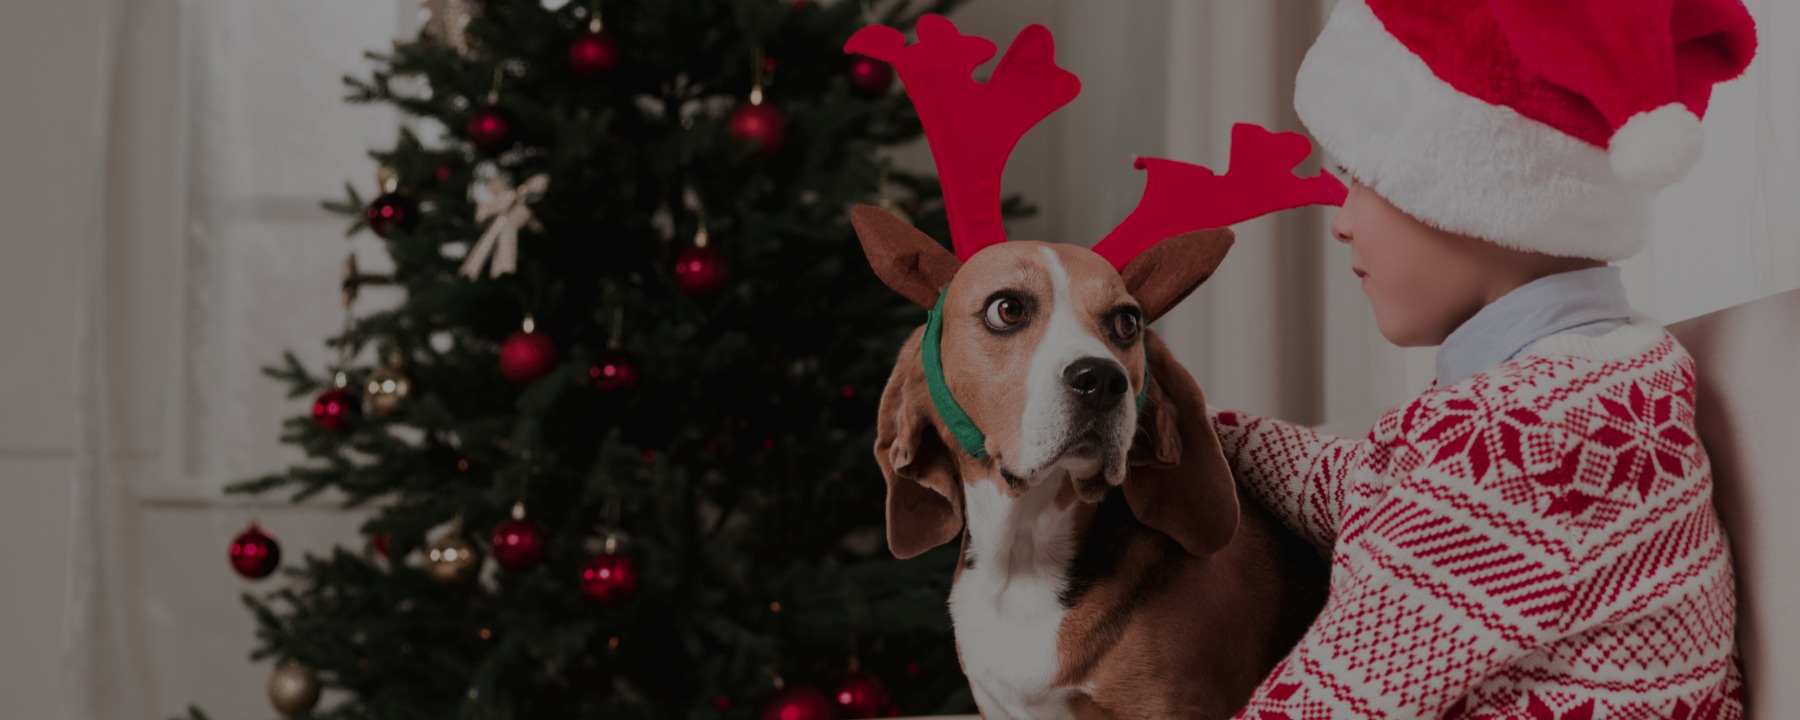 How to Keep Your Pets Safe During the Holidays